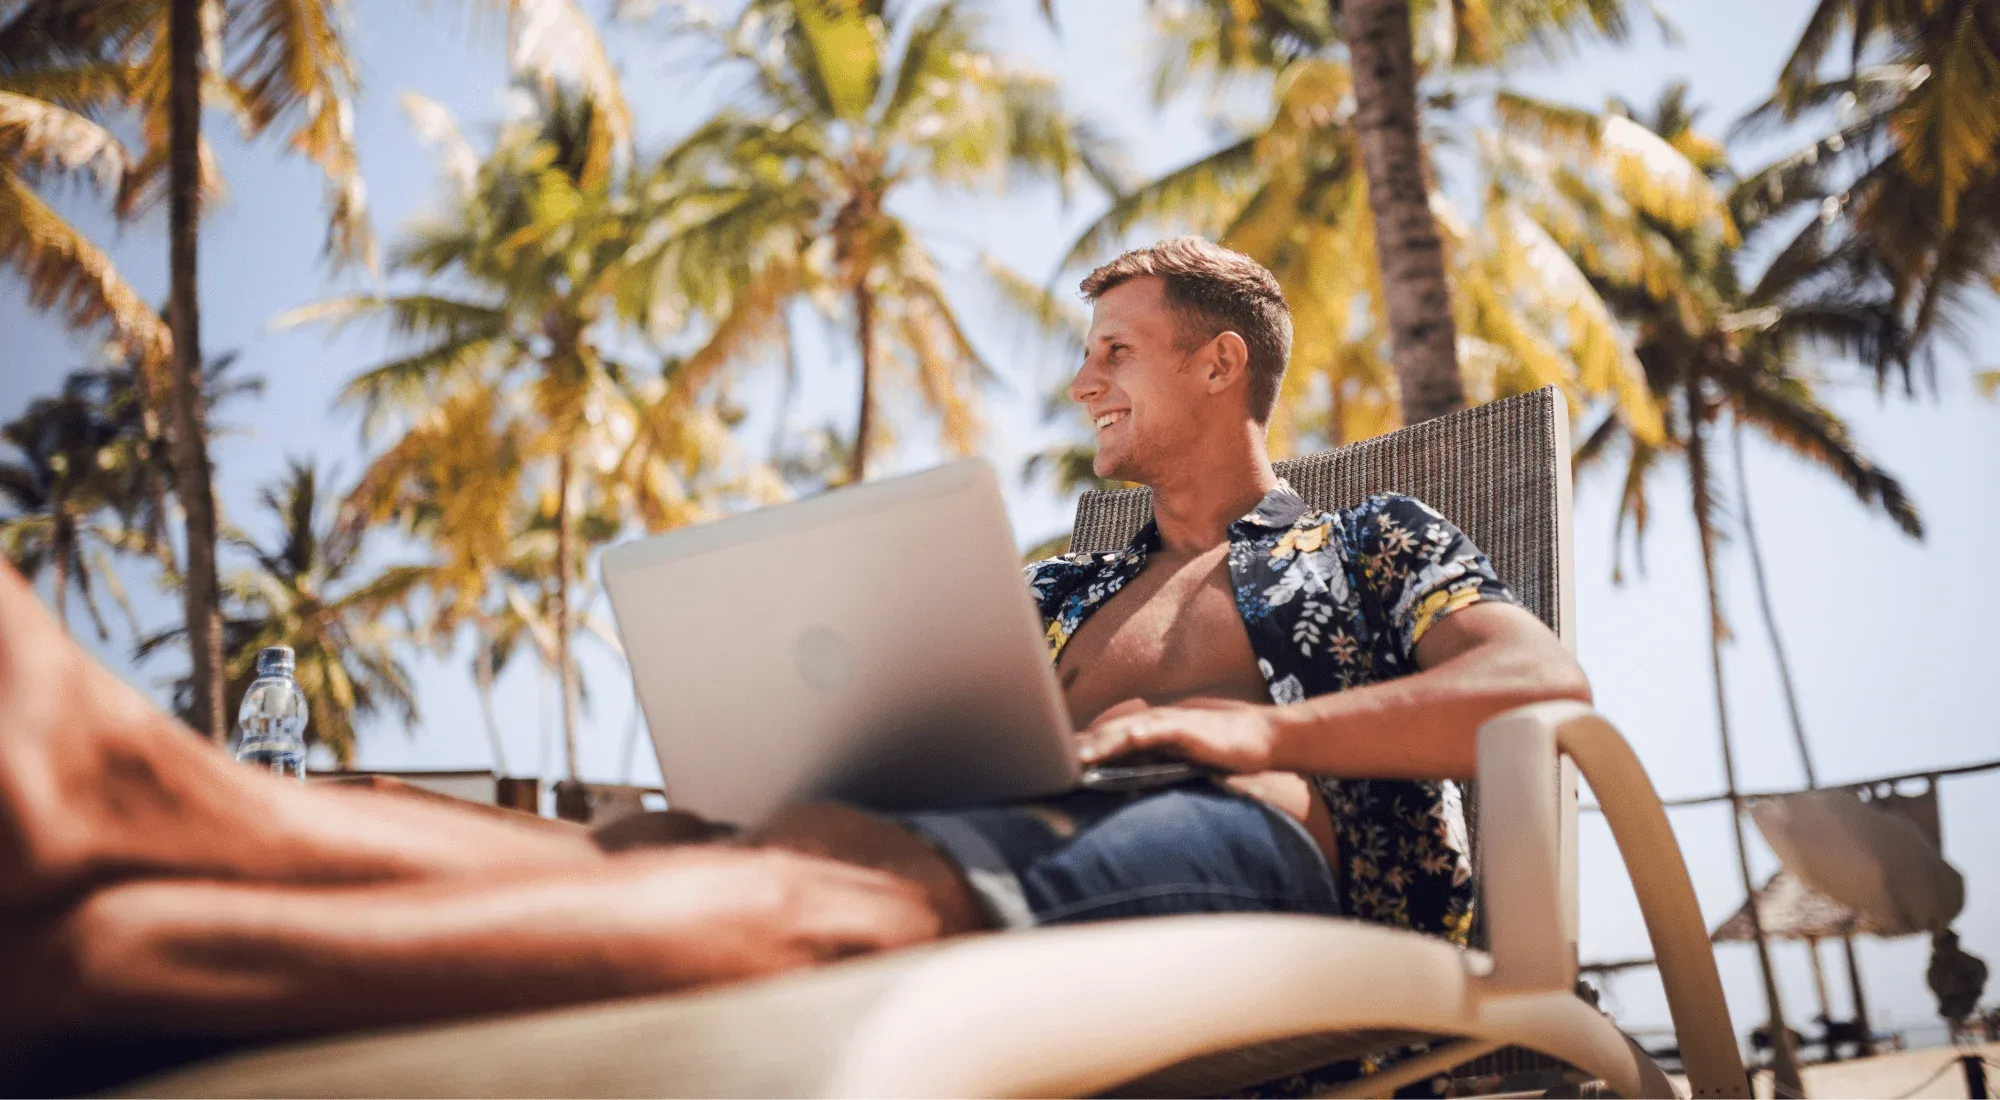 Digital nomad working from the beach with his laptop